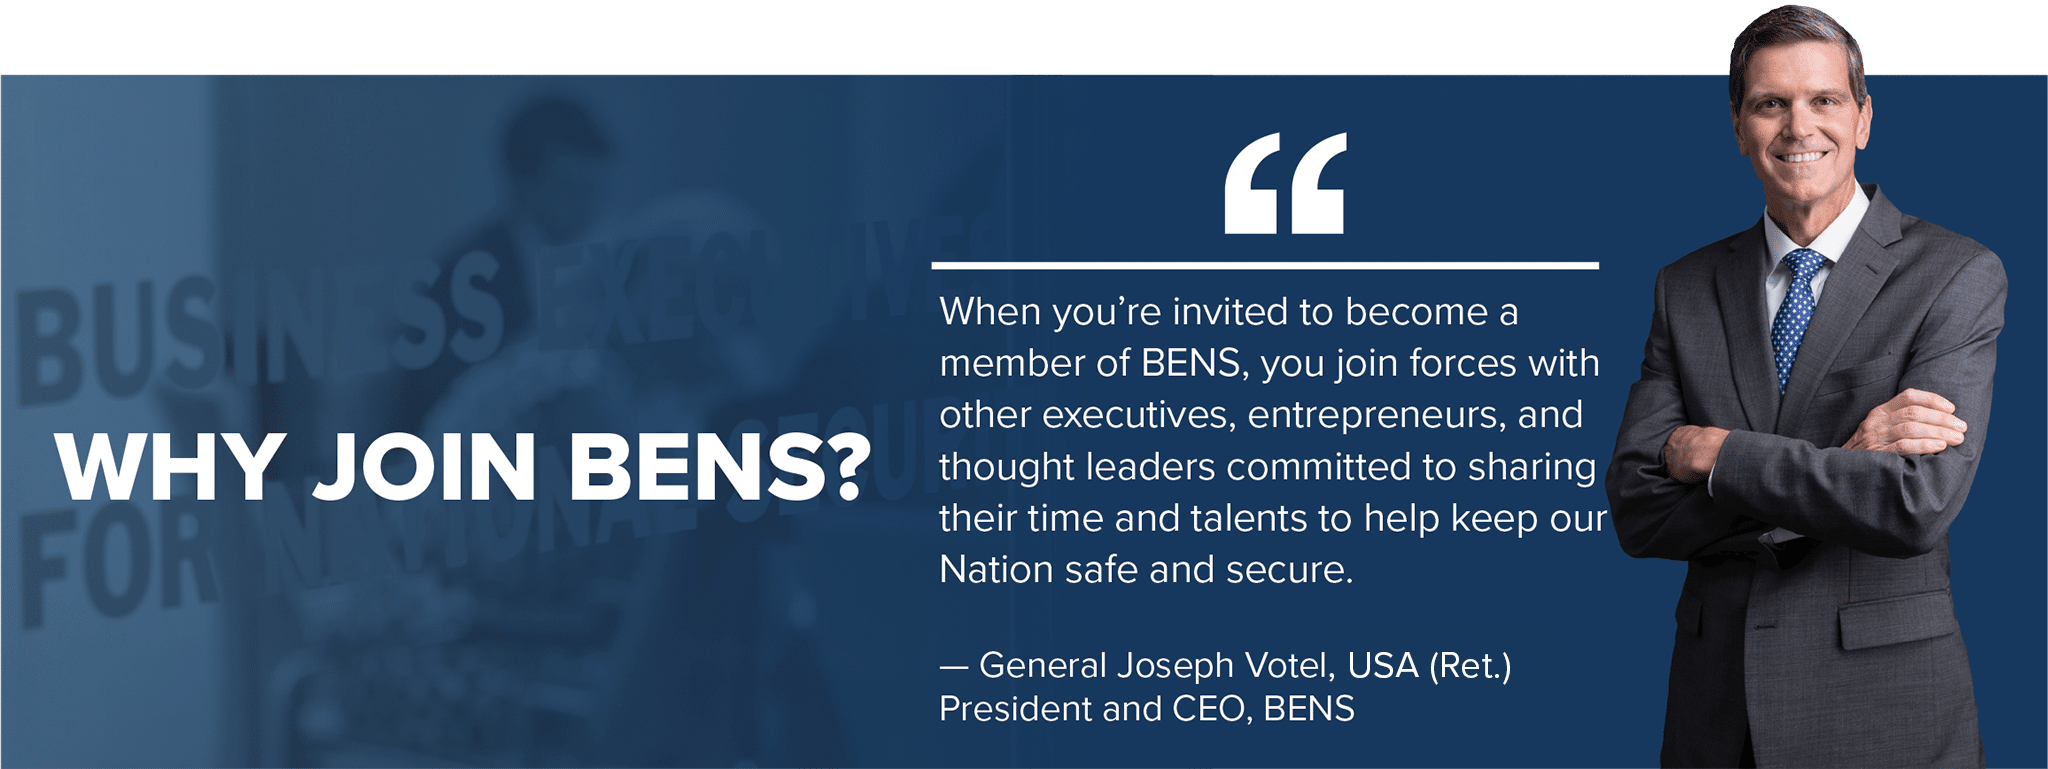 Why Join BENS? Quote by General Votel